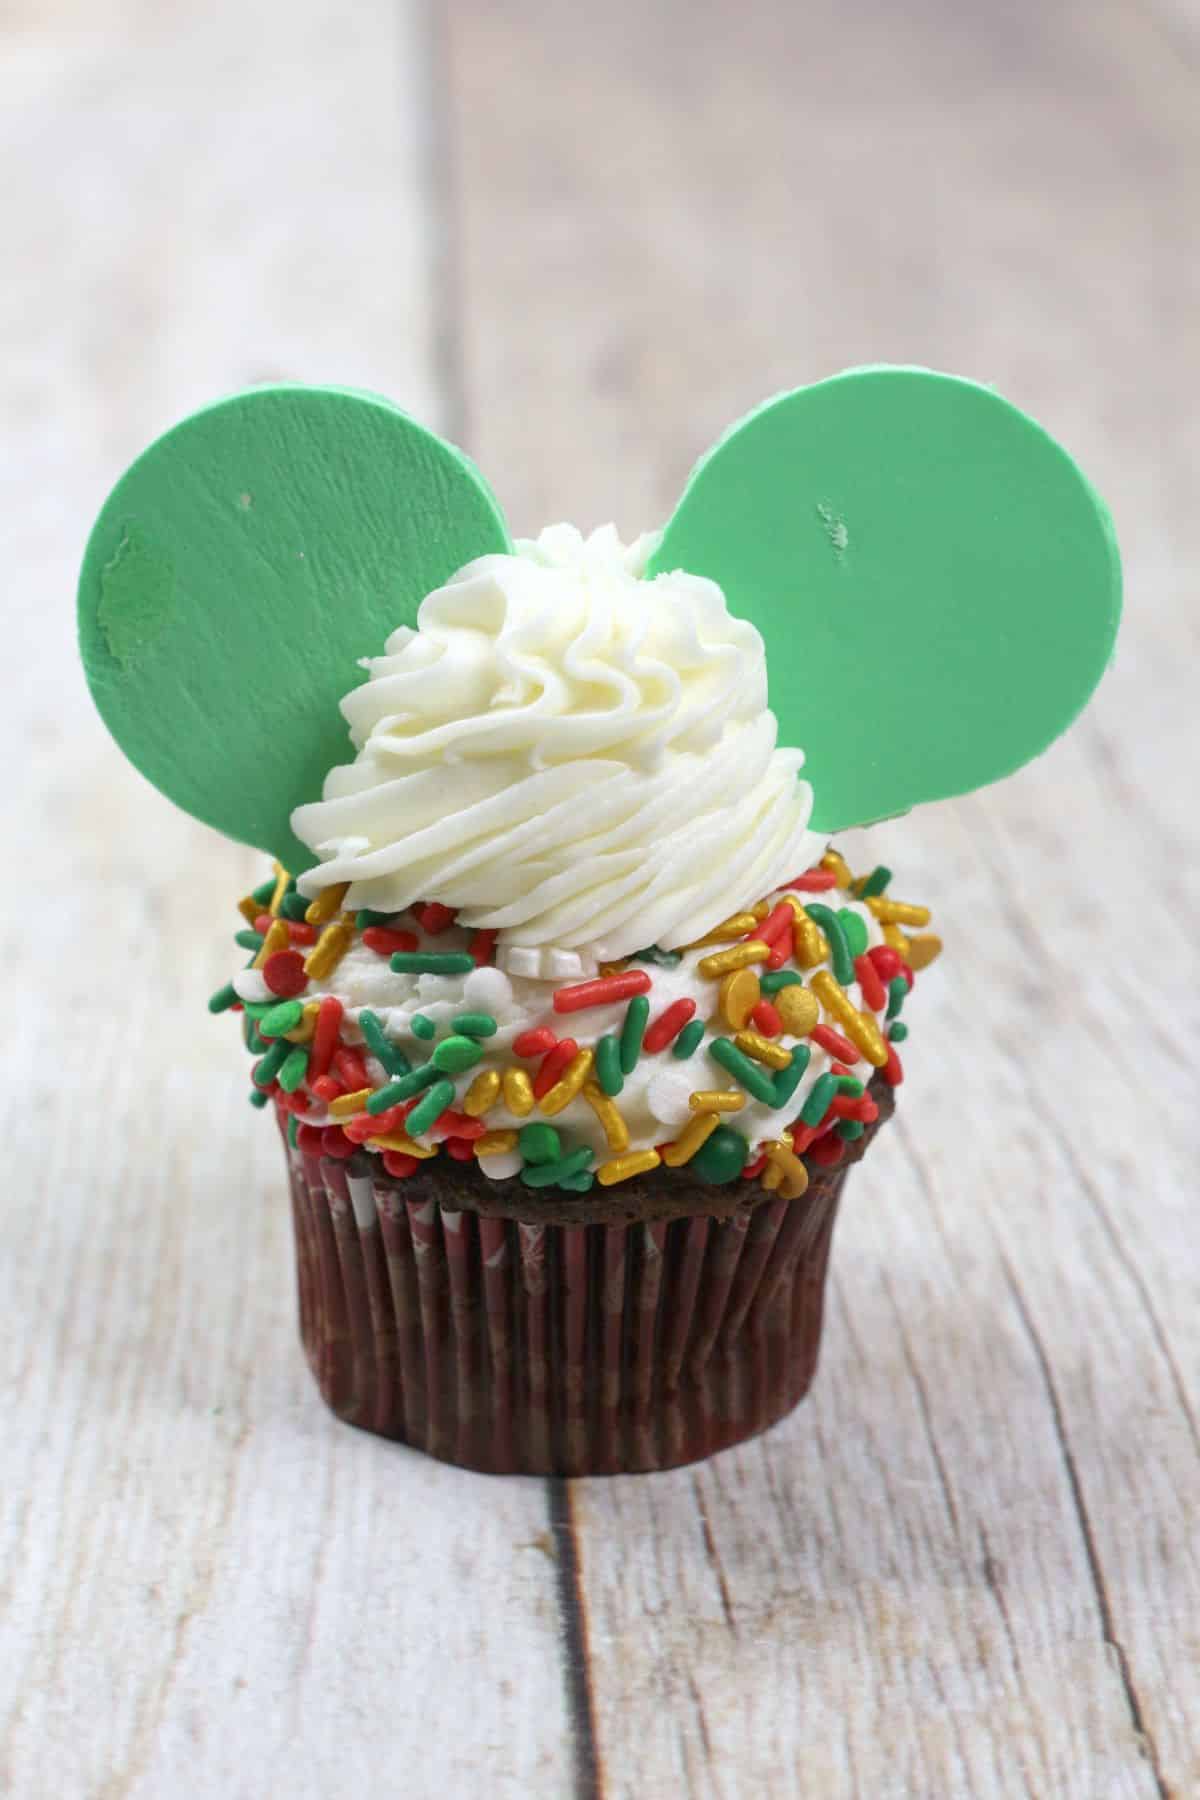 The mini mouse ears are added on the top of the cupcake with frosting.